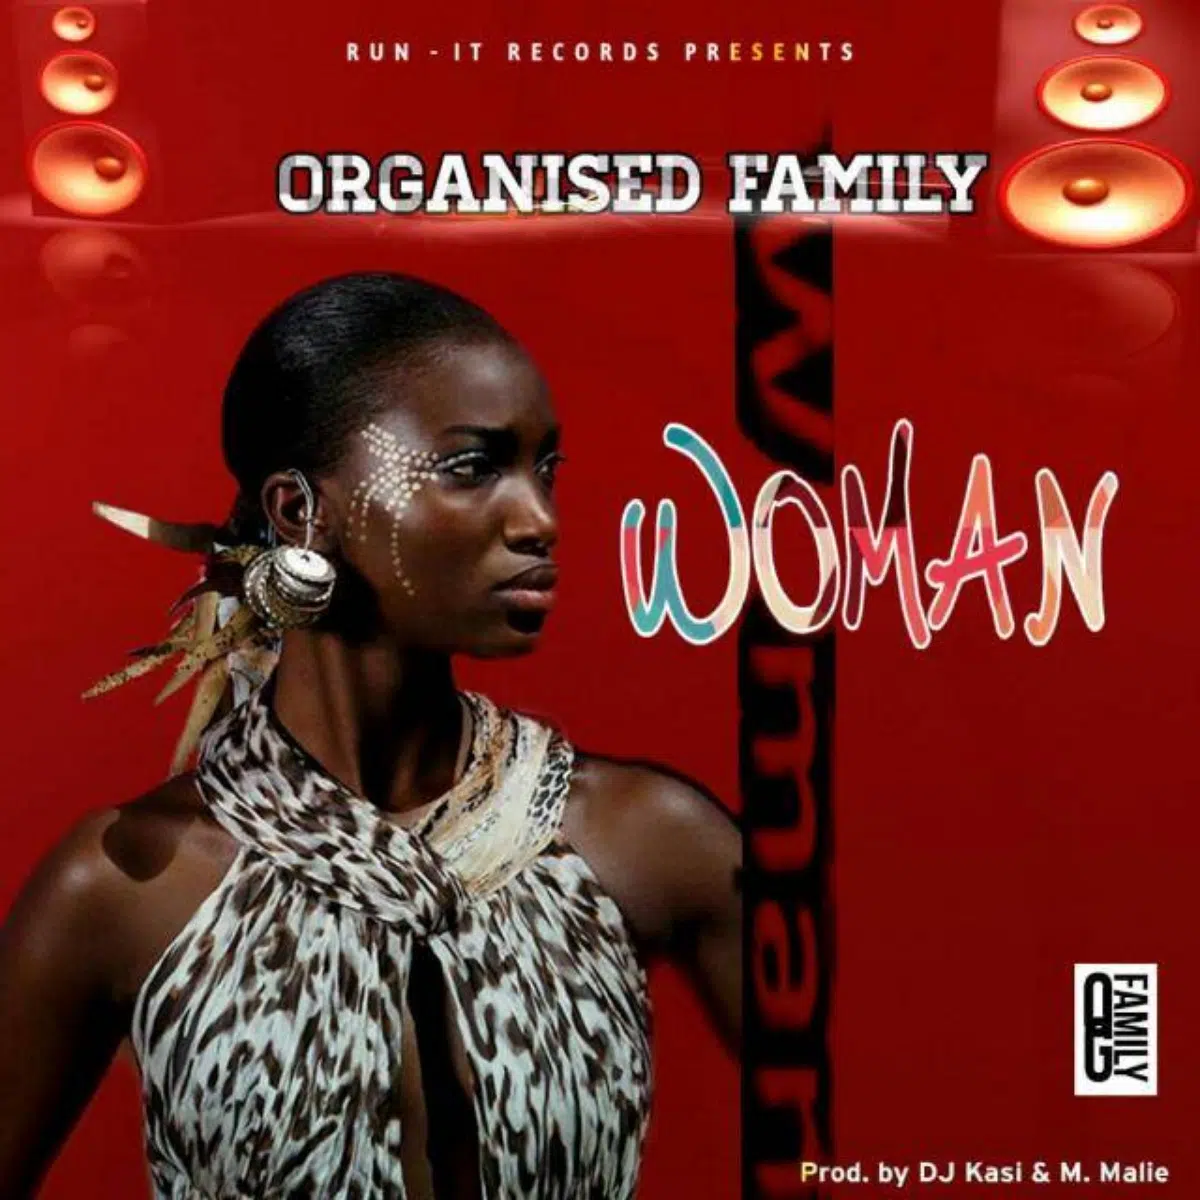 DOWNLOAD: Organised Family – “Woman” Mp3